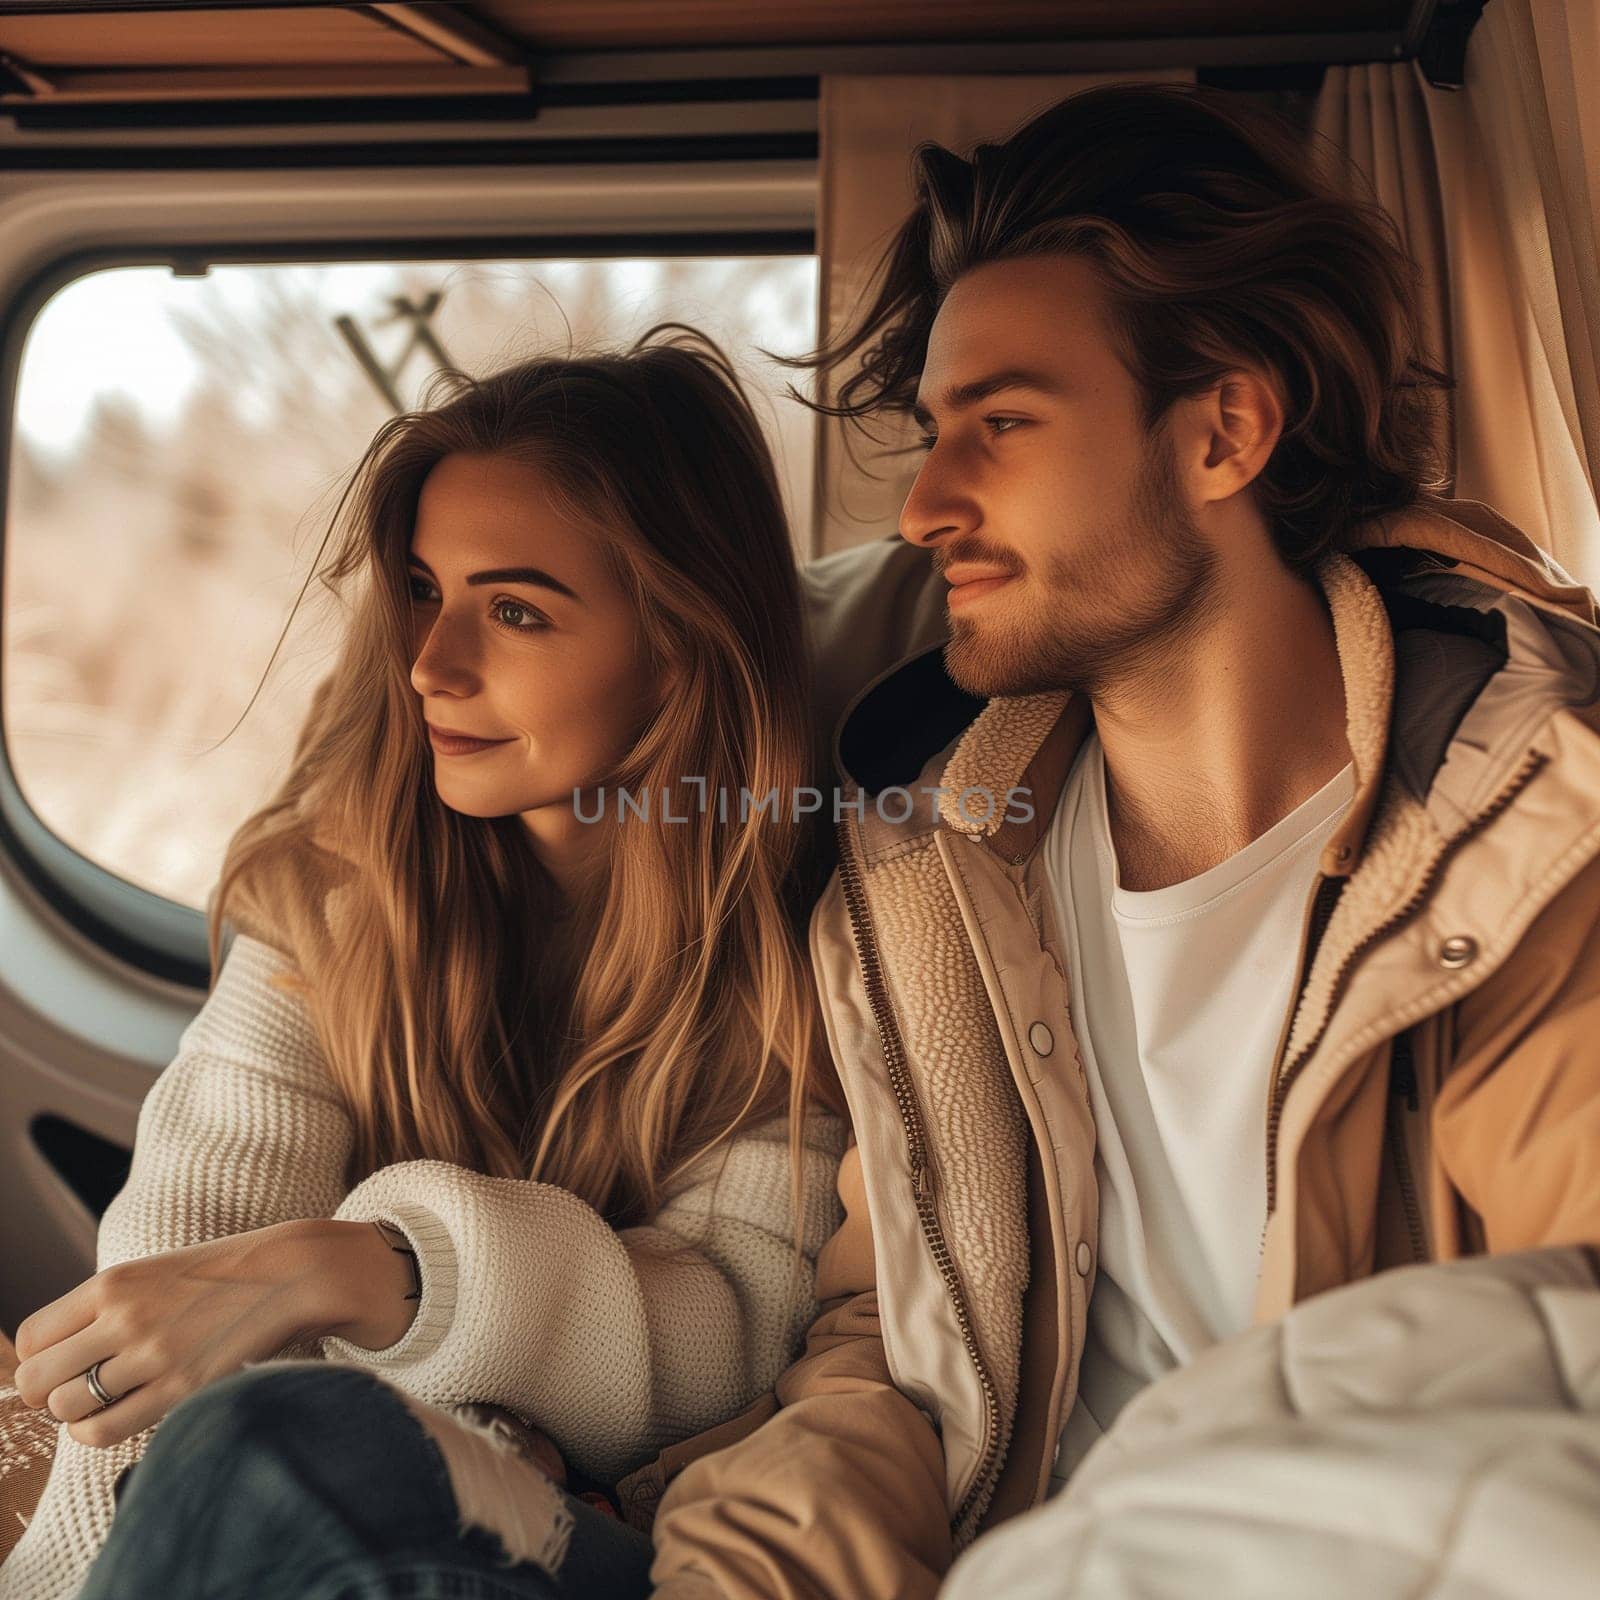 A young couple traveling. High quality illustration